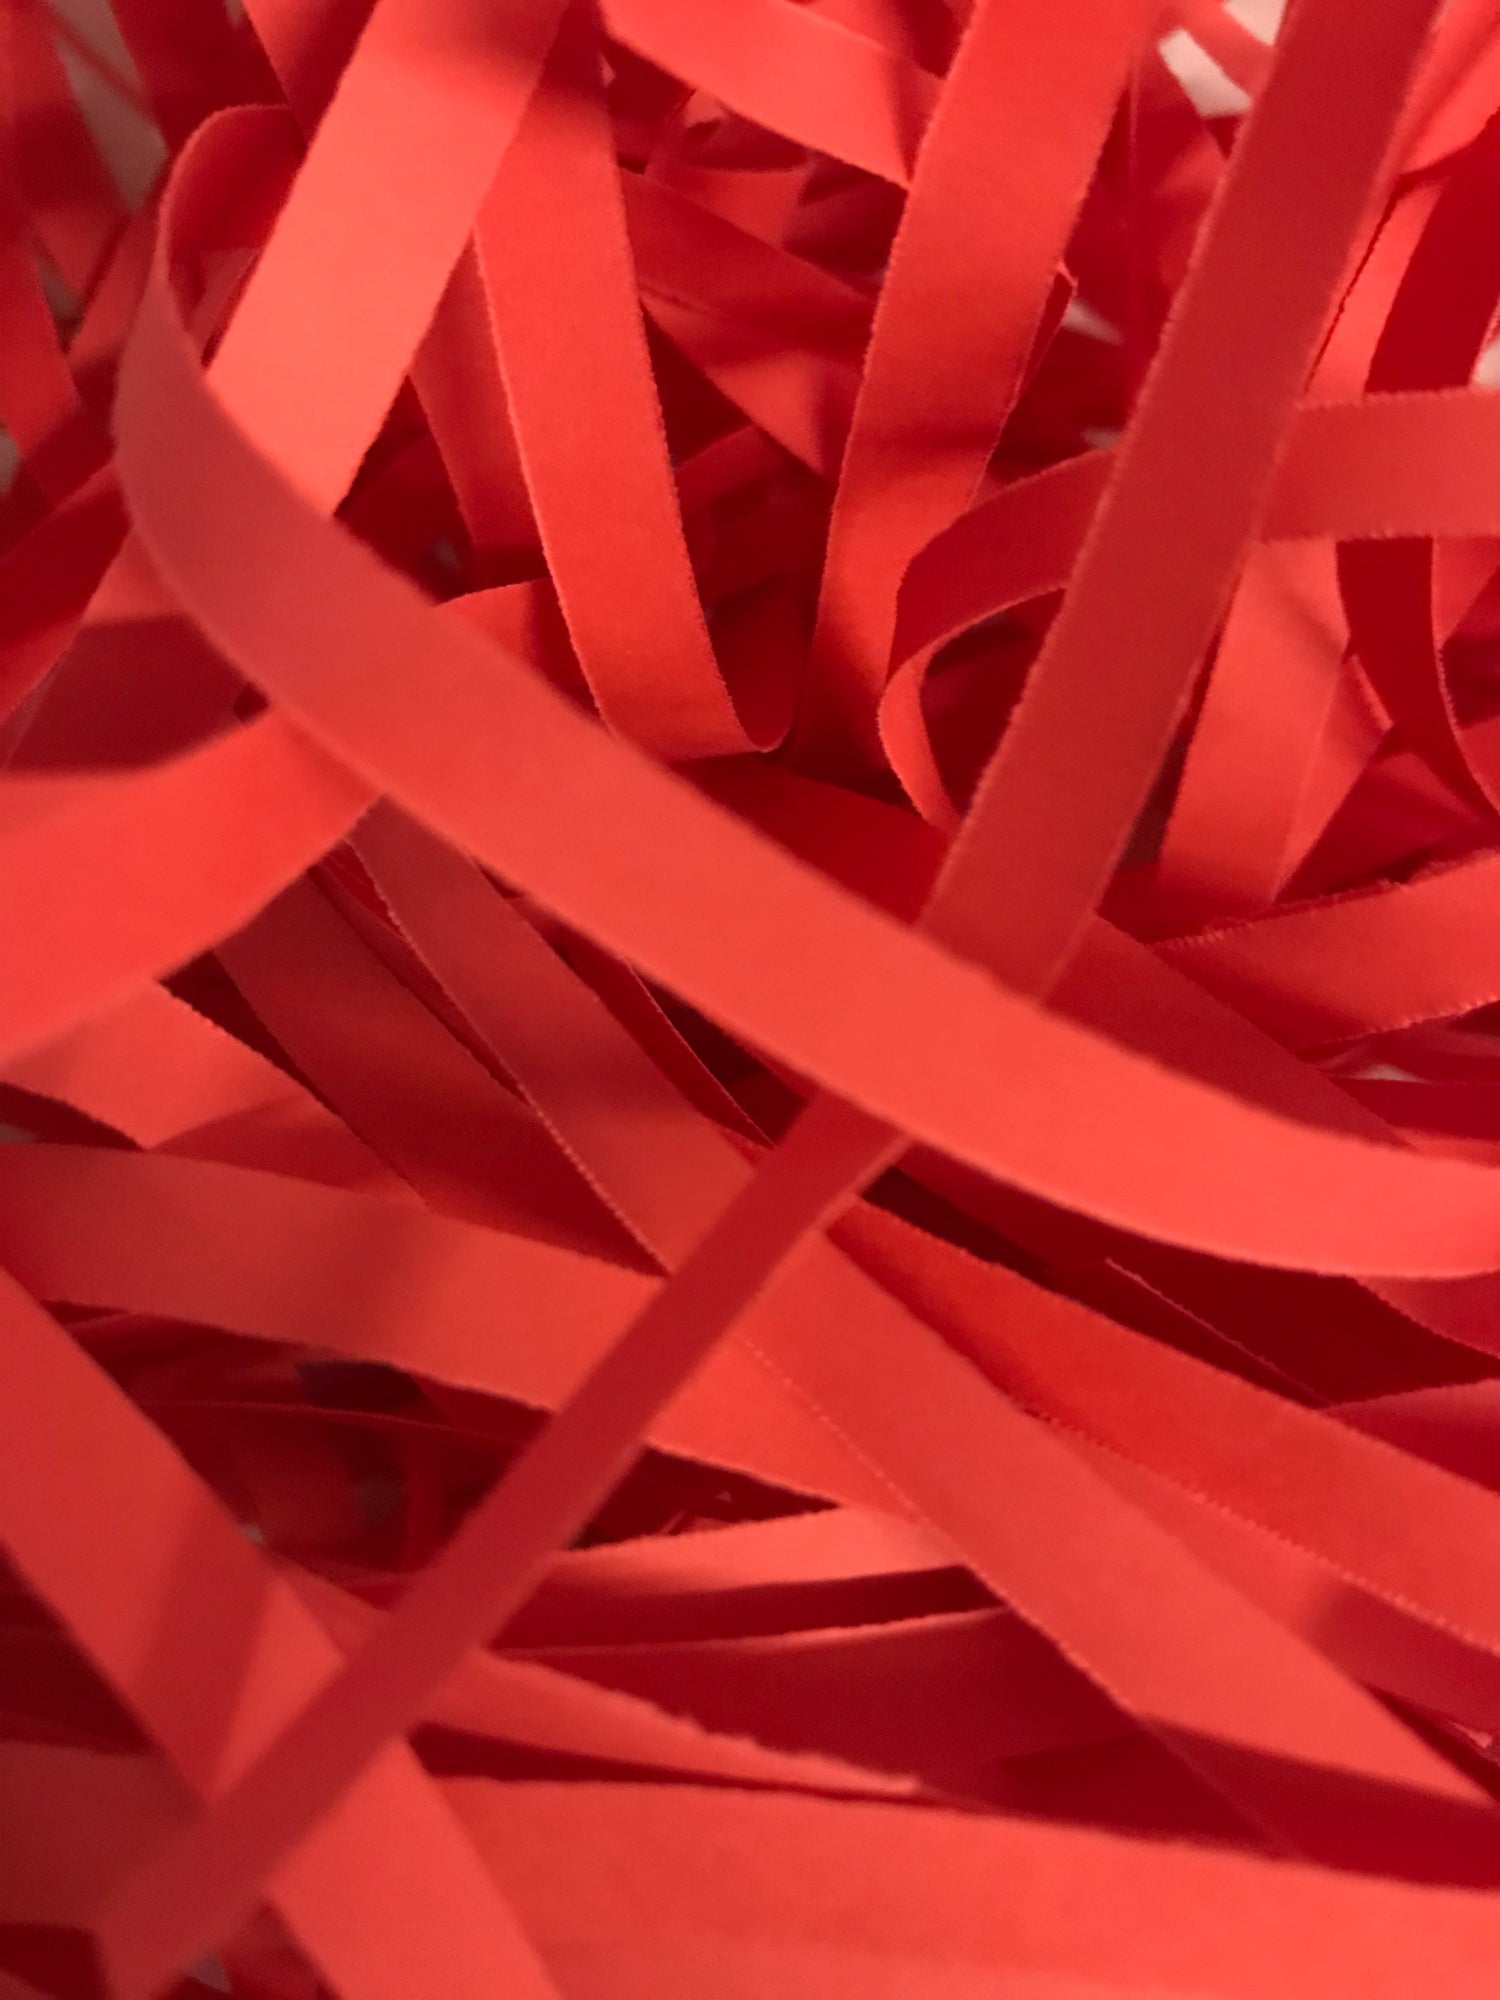 Red Thick Shredded Paper